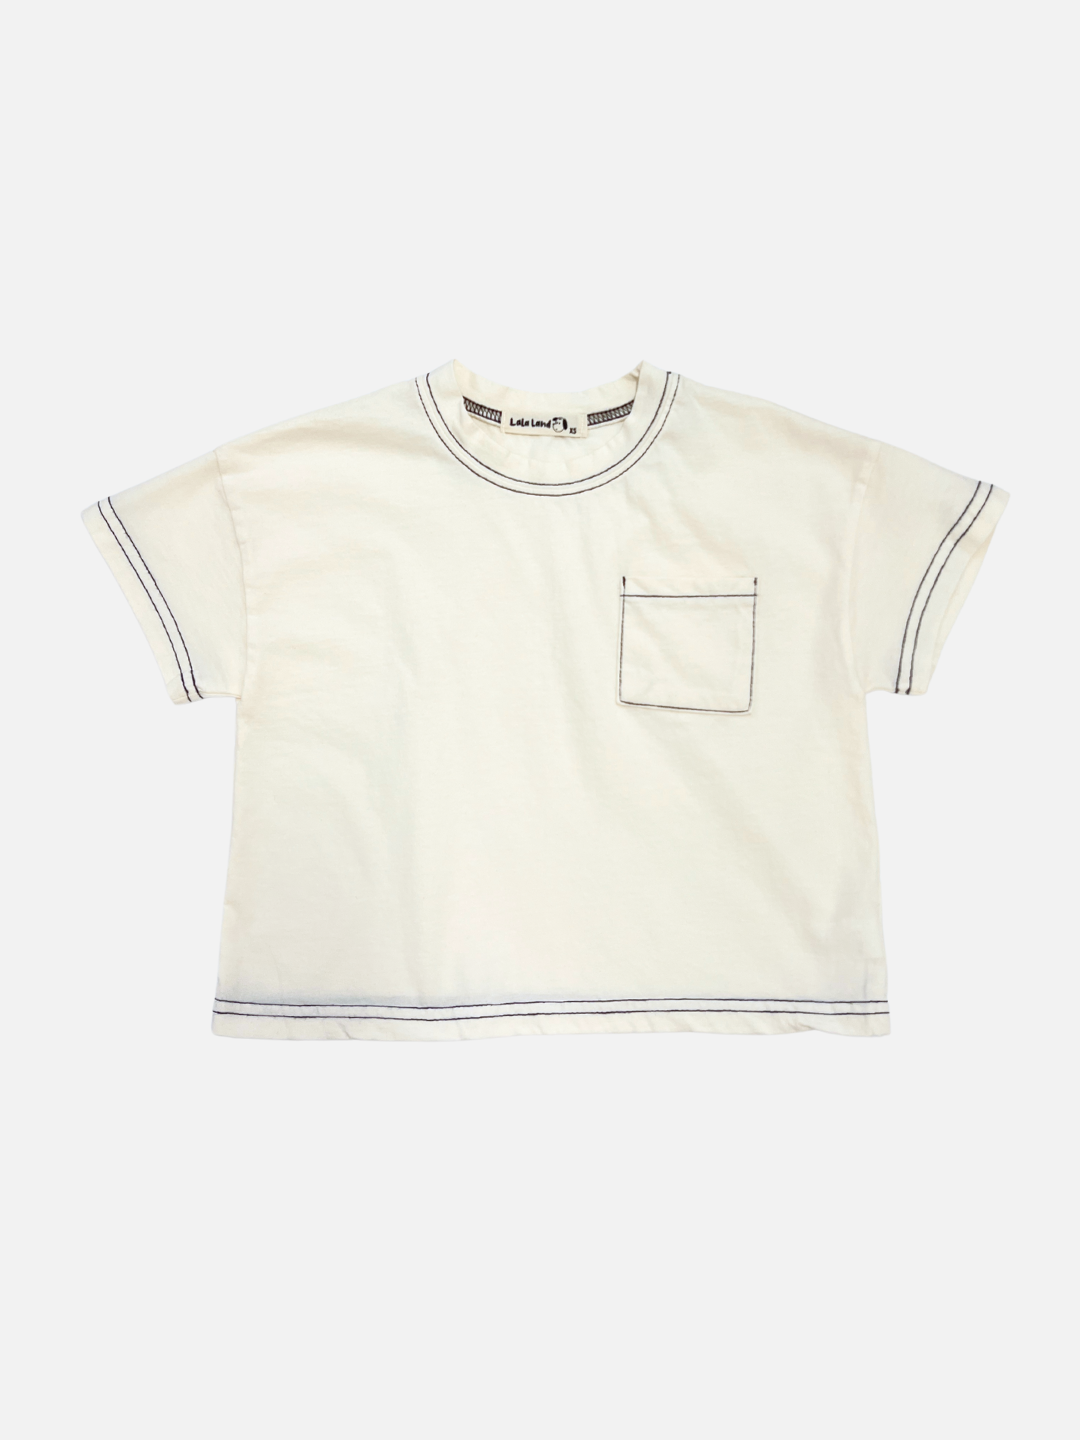 Ivory | Front view of the kids' stitch pocket tee in Ivory feturing contrast black stitch and a small pocket on the right side